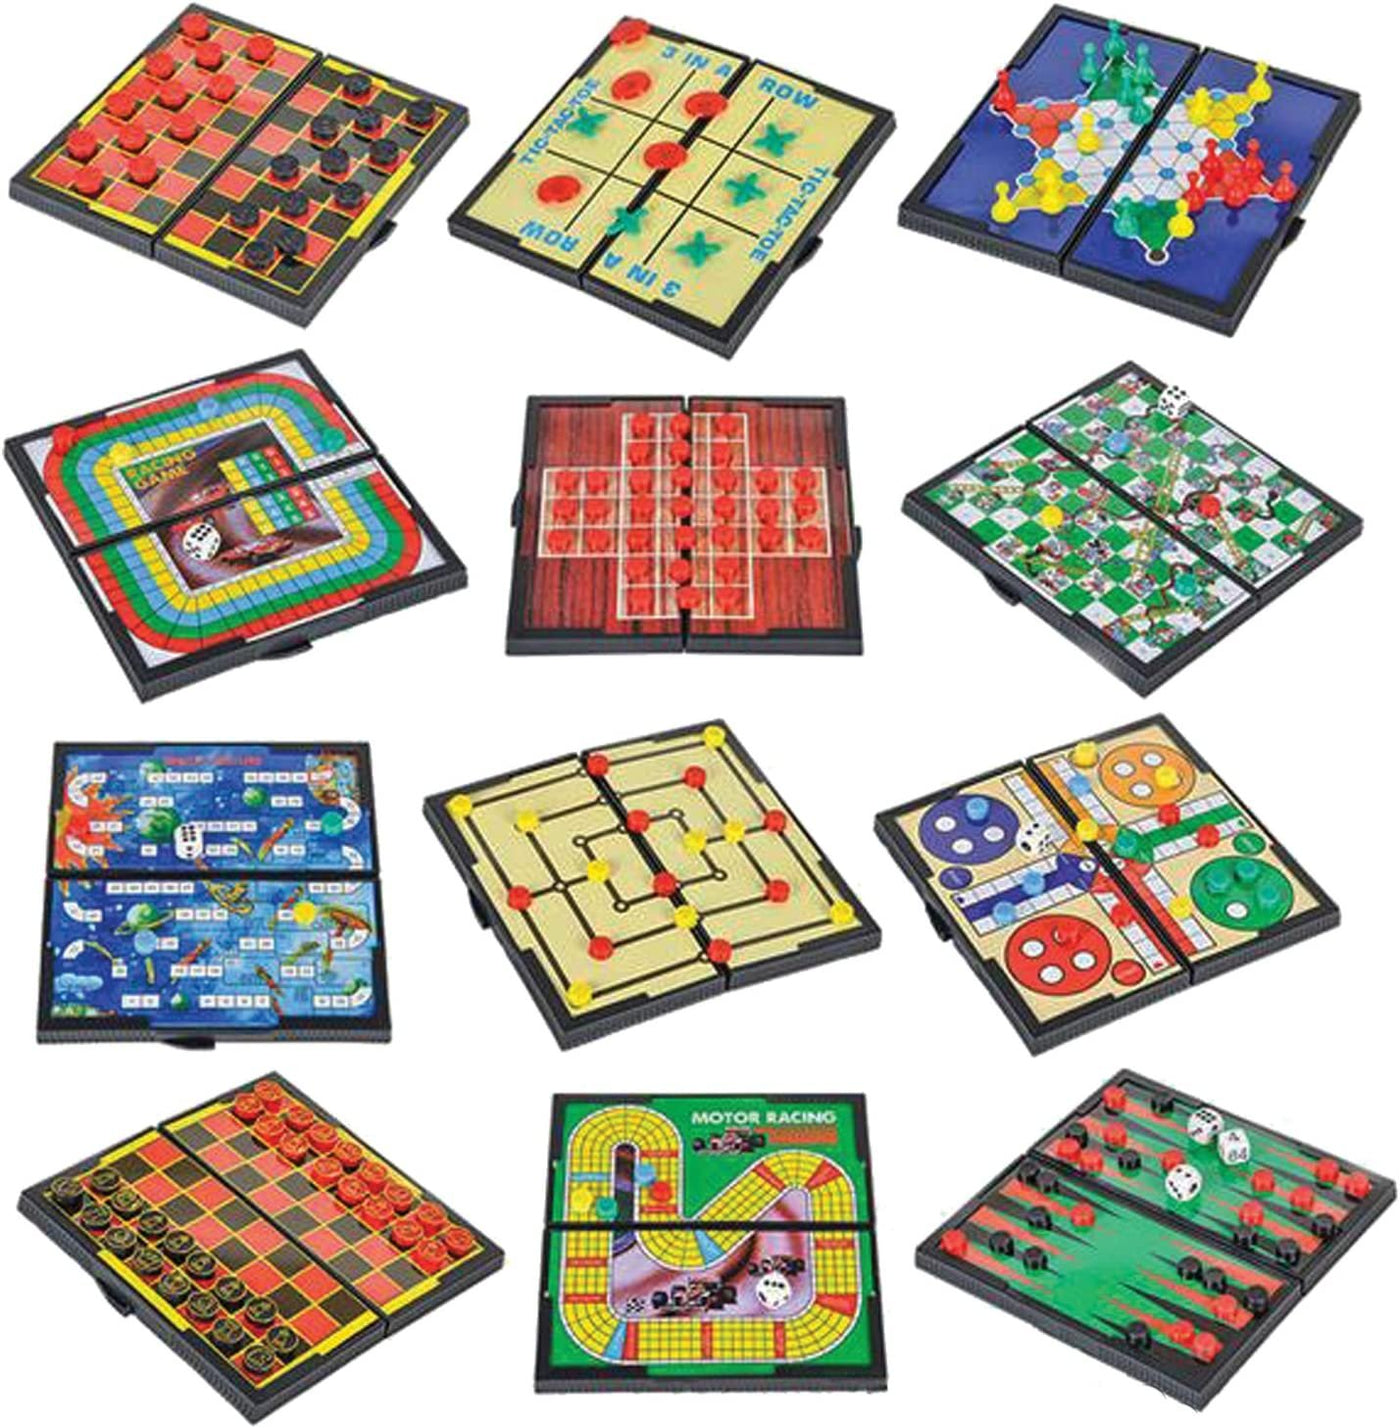 Wholesale Deluxe Pocket Magnetic Travel Games